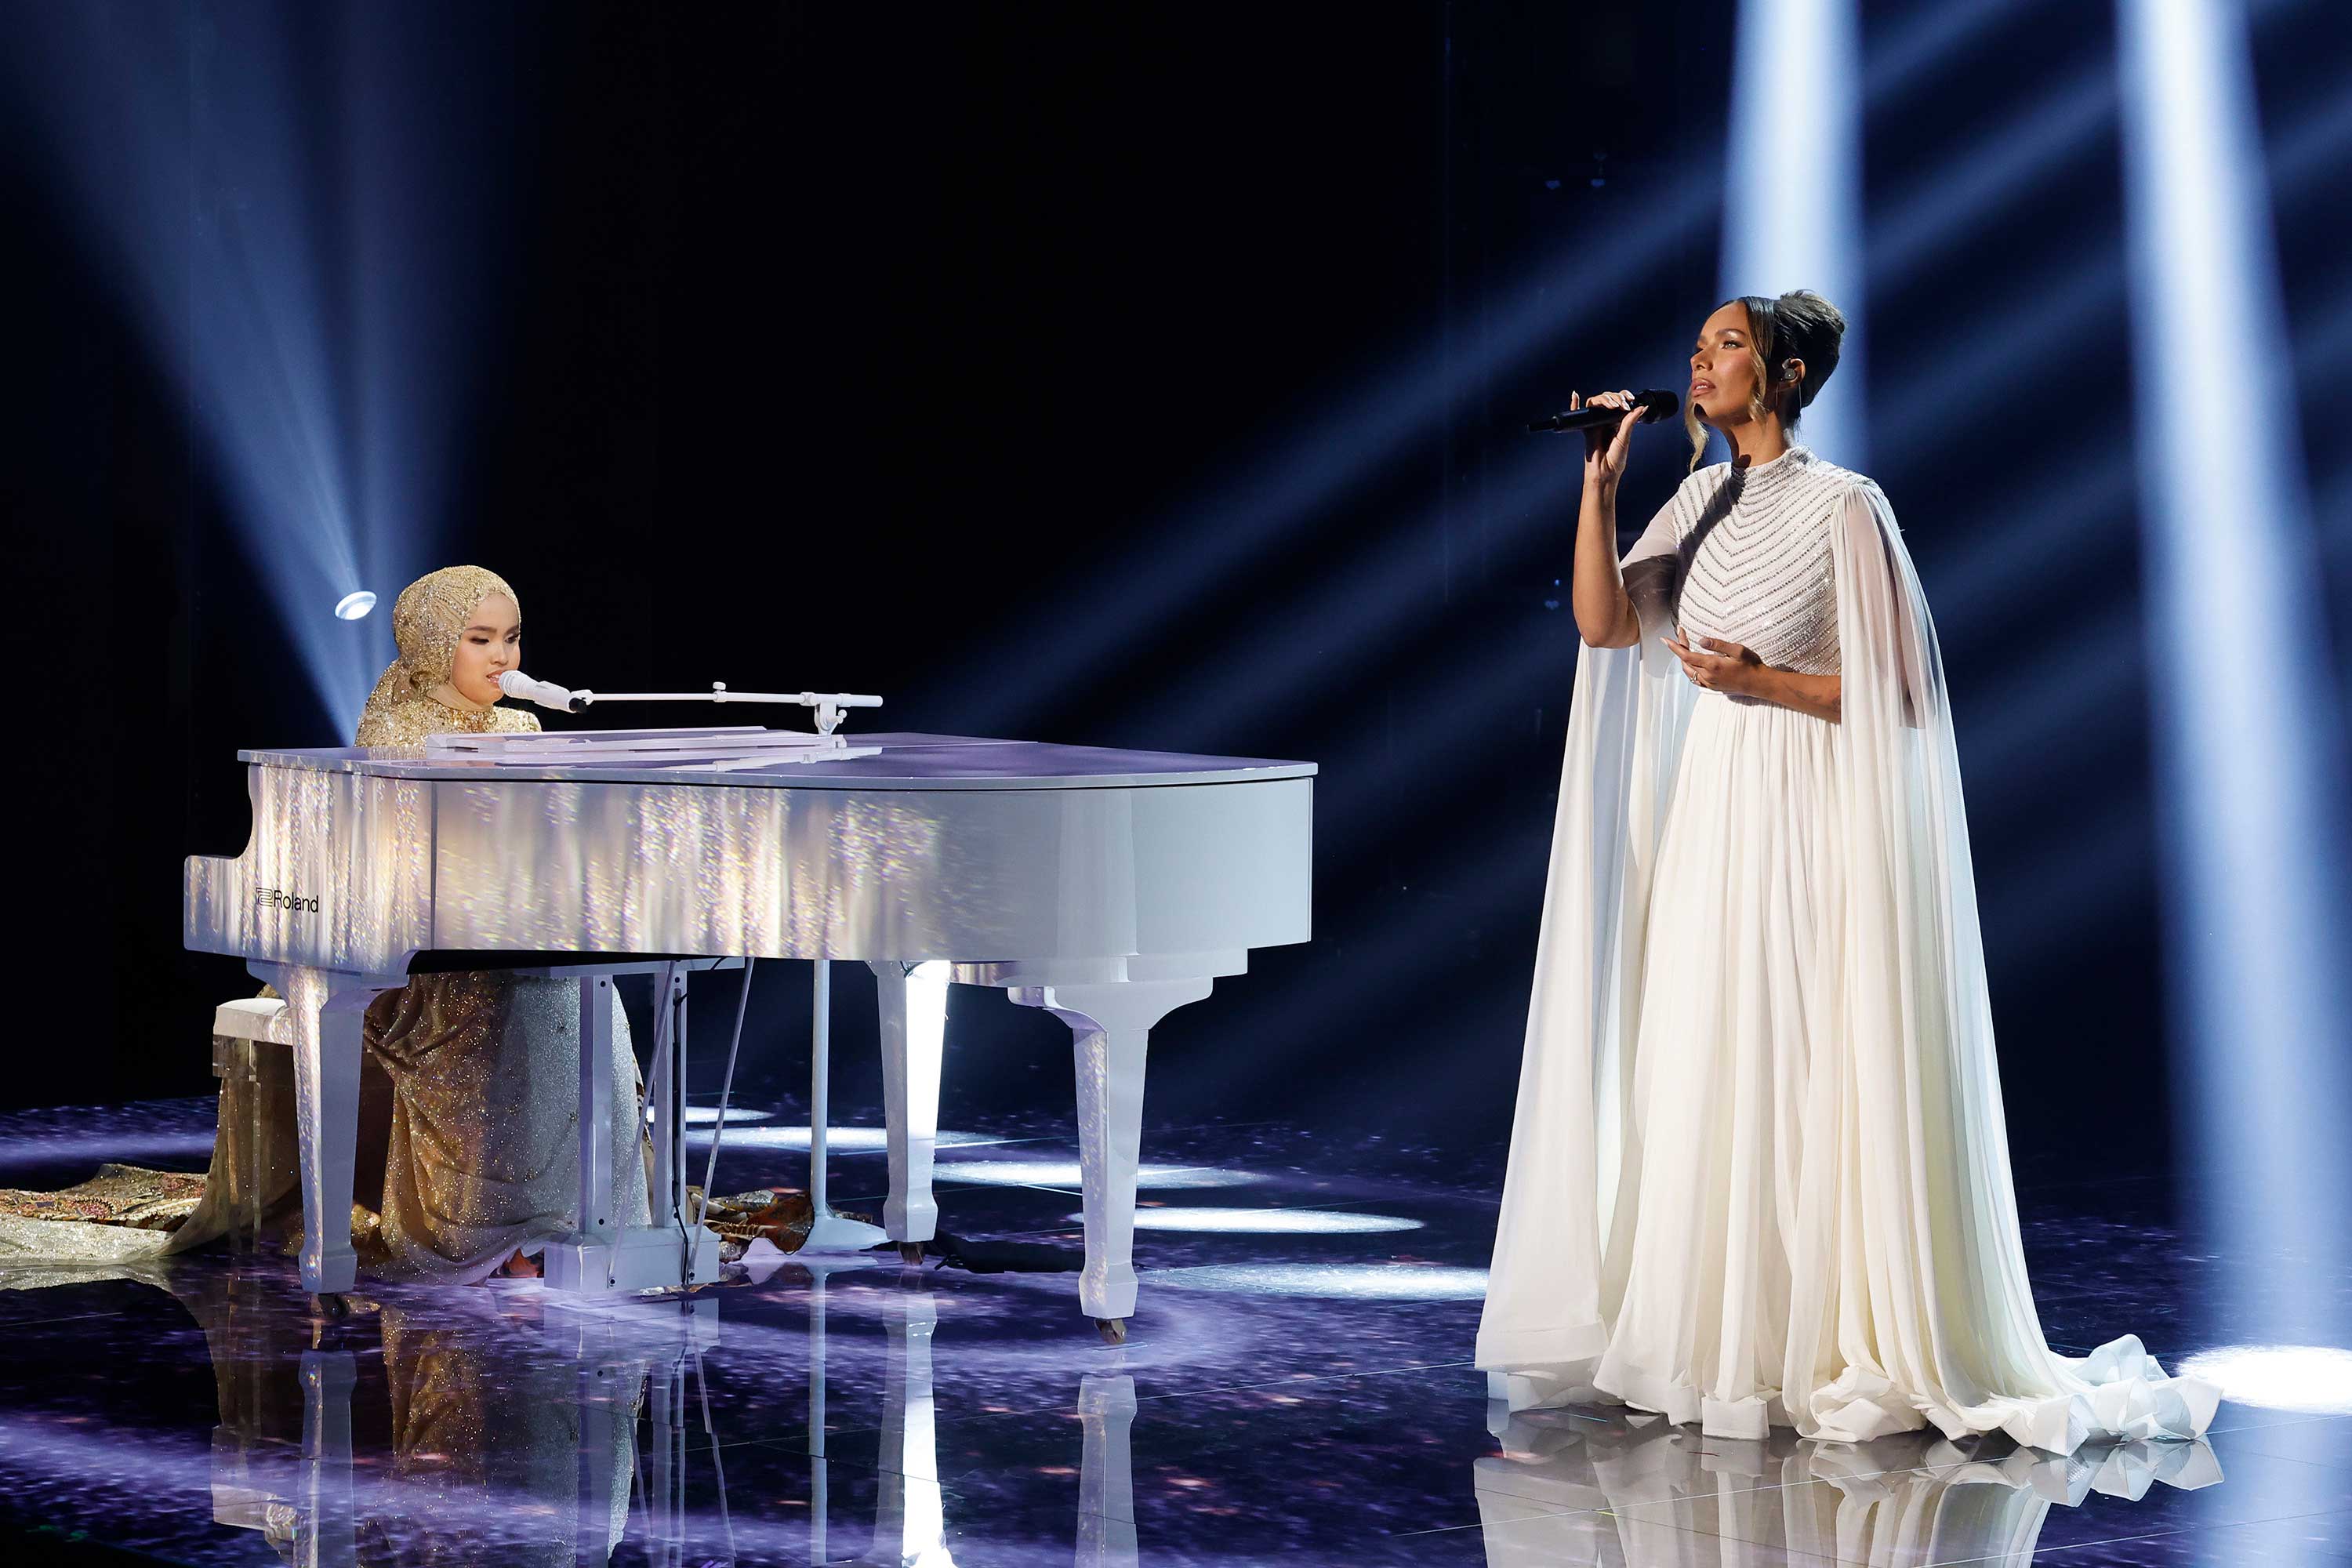 Leona Lewis and Putri Ariani's Voices Powerfully Blended for an AGT